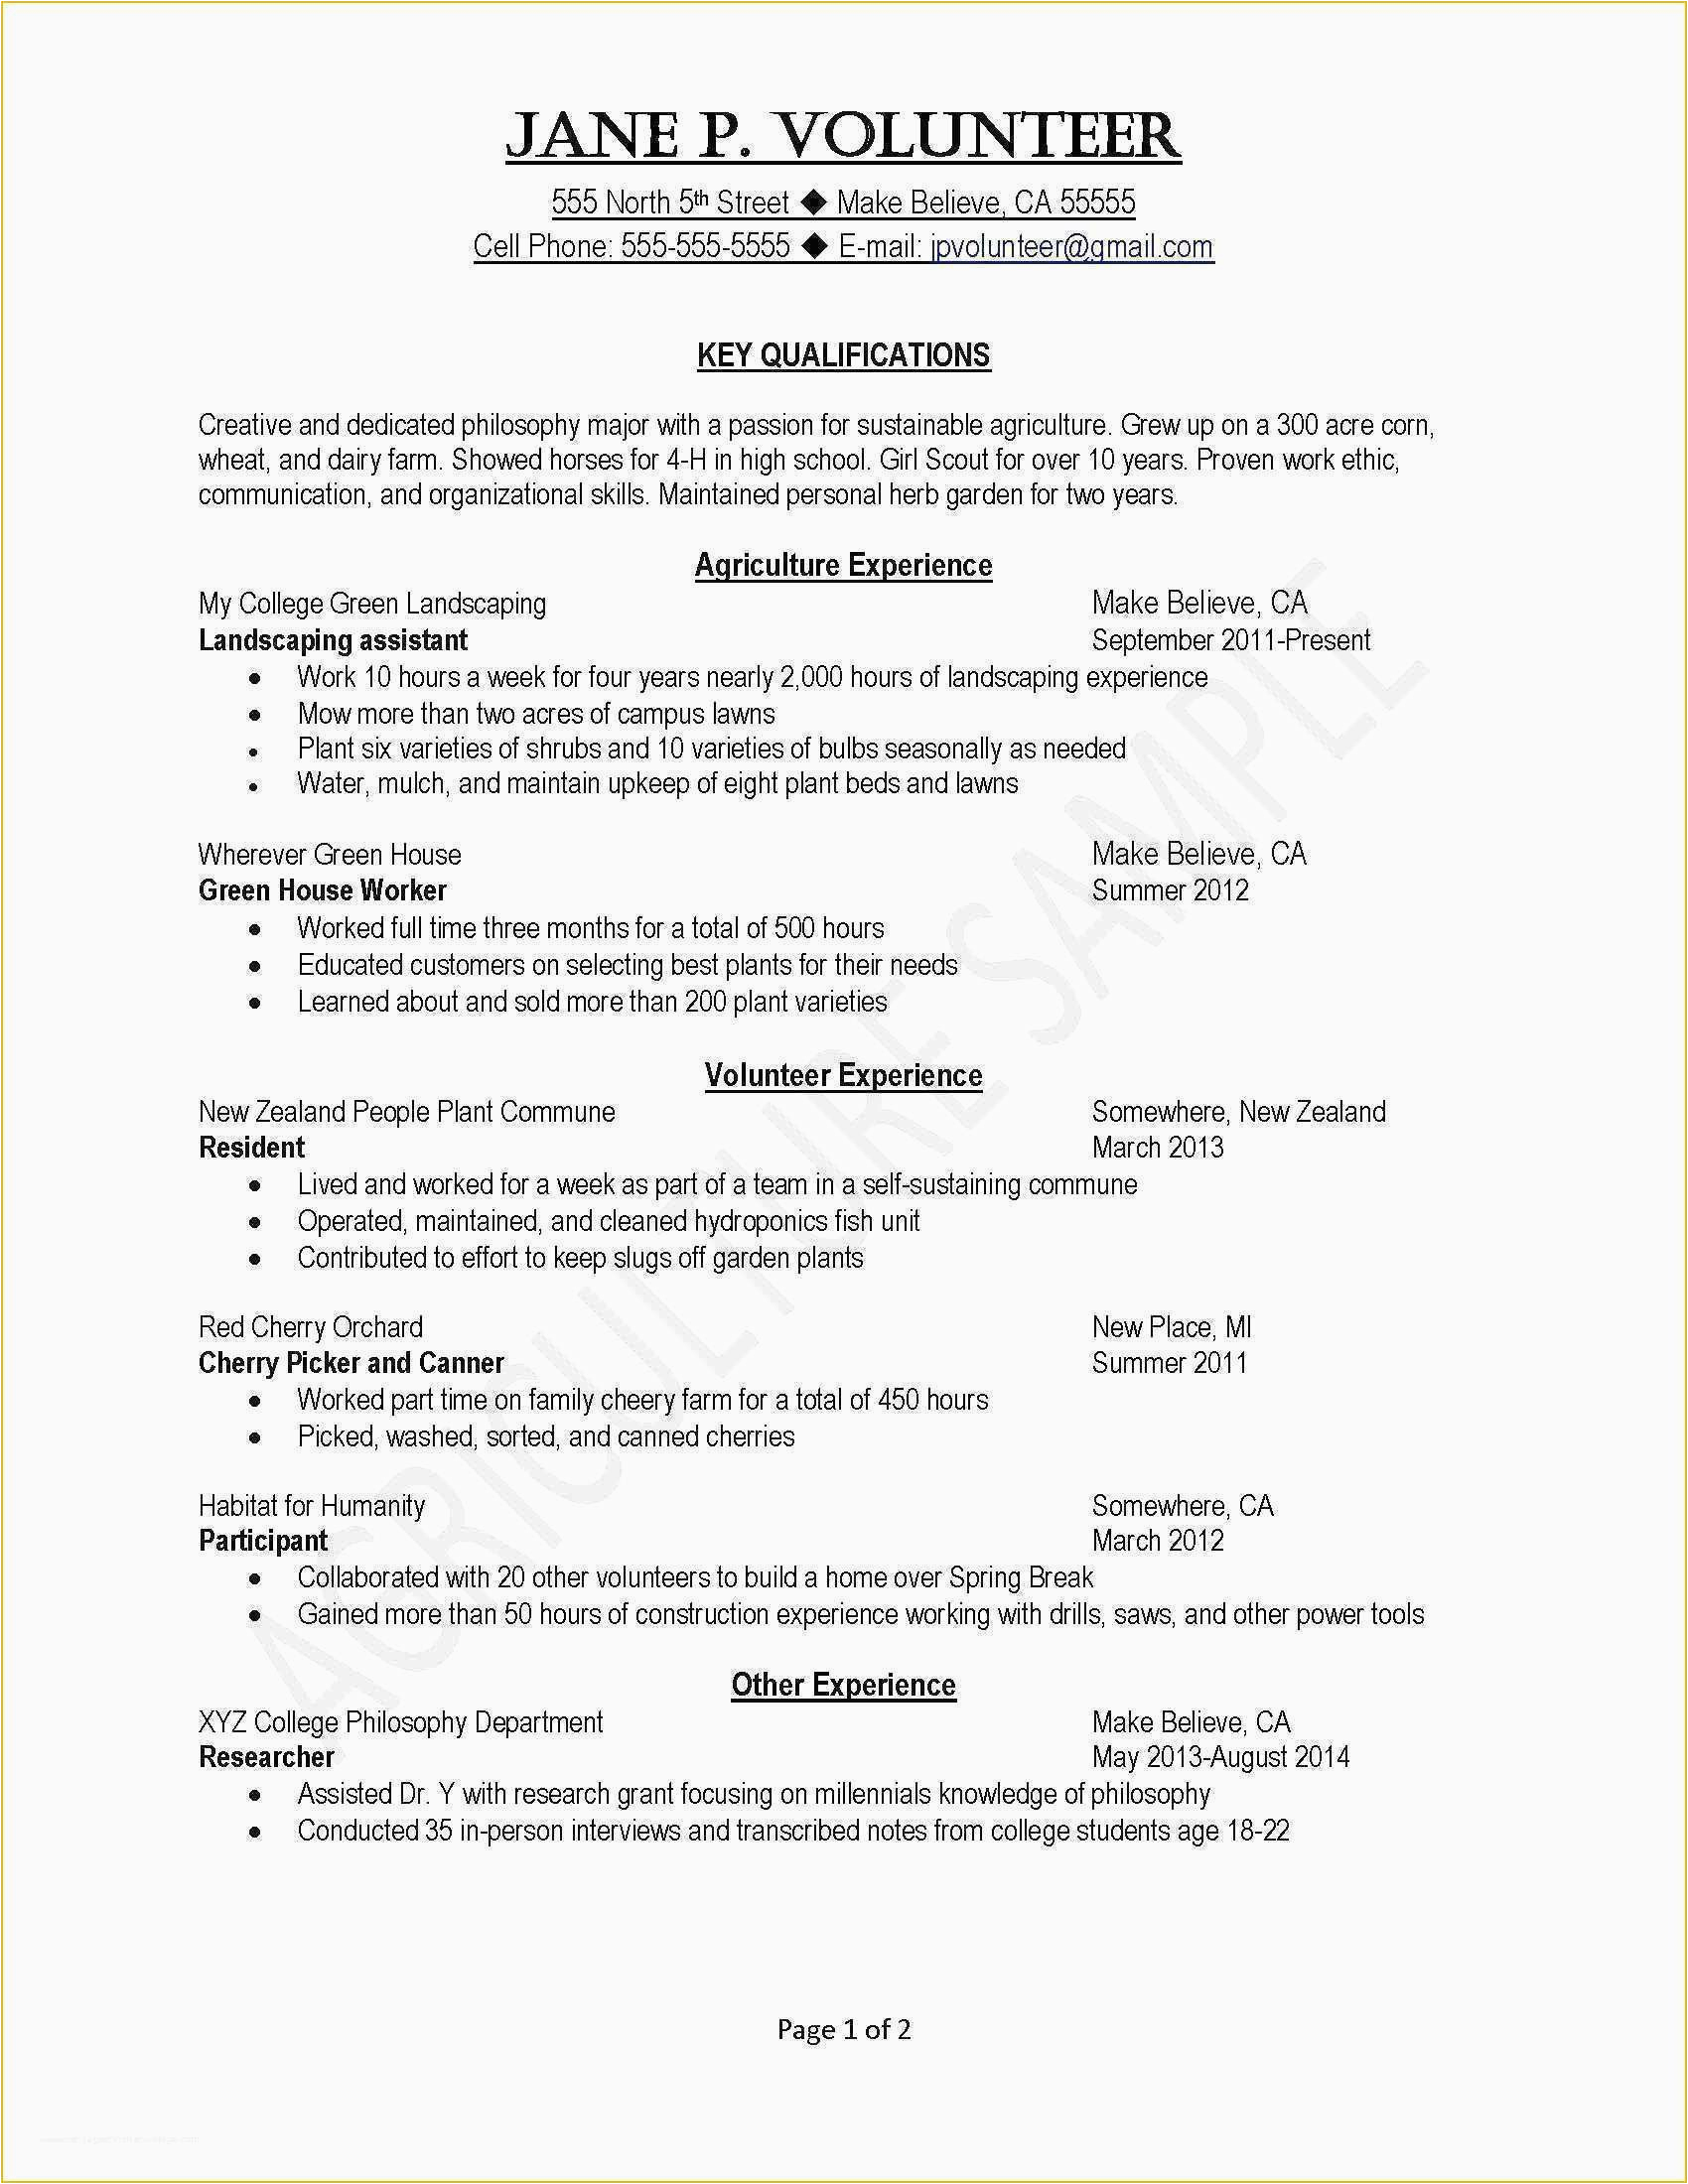 Sample Resume for Oil and Gas Job Free Oil and Gas Resume Templates Oil and Gas Resumes